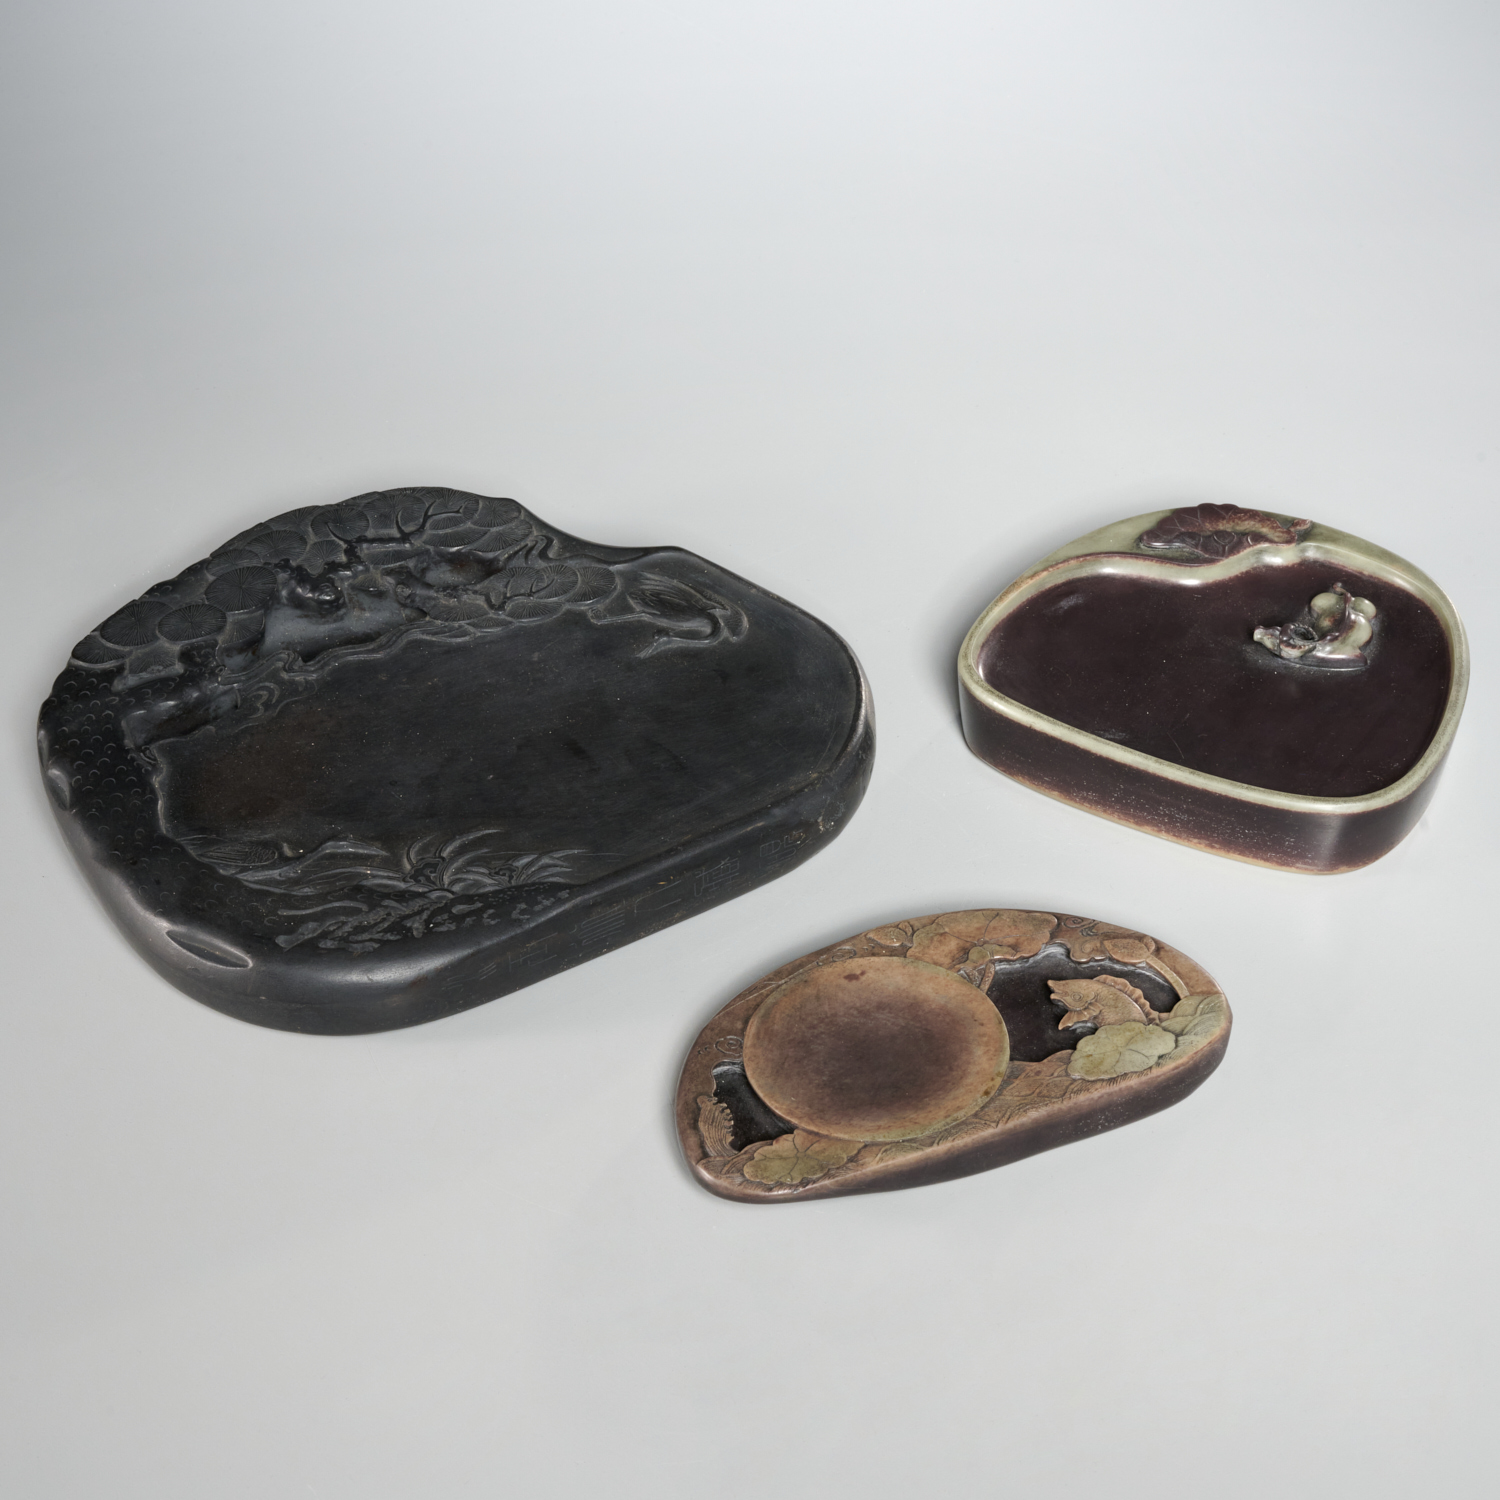  3 JAPANESE CARVED INK STONES 30c018